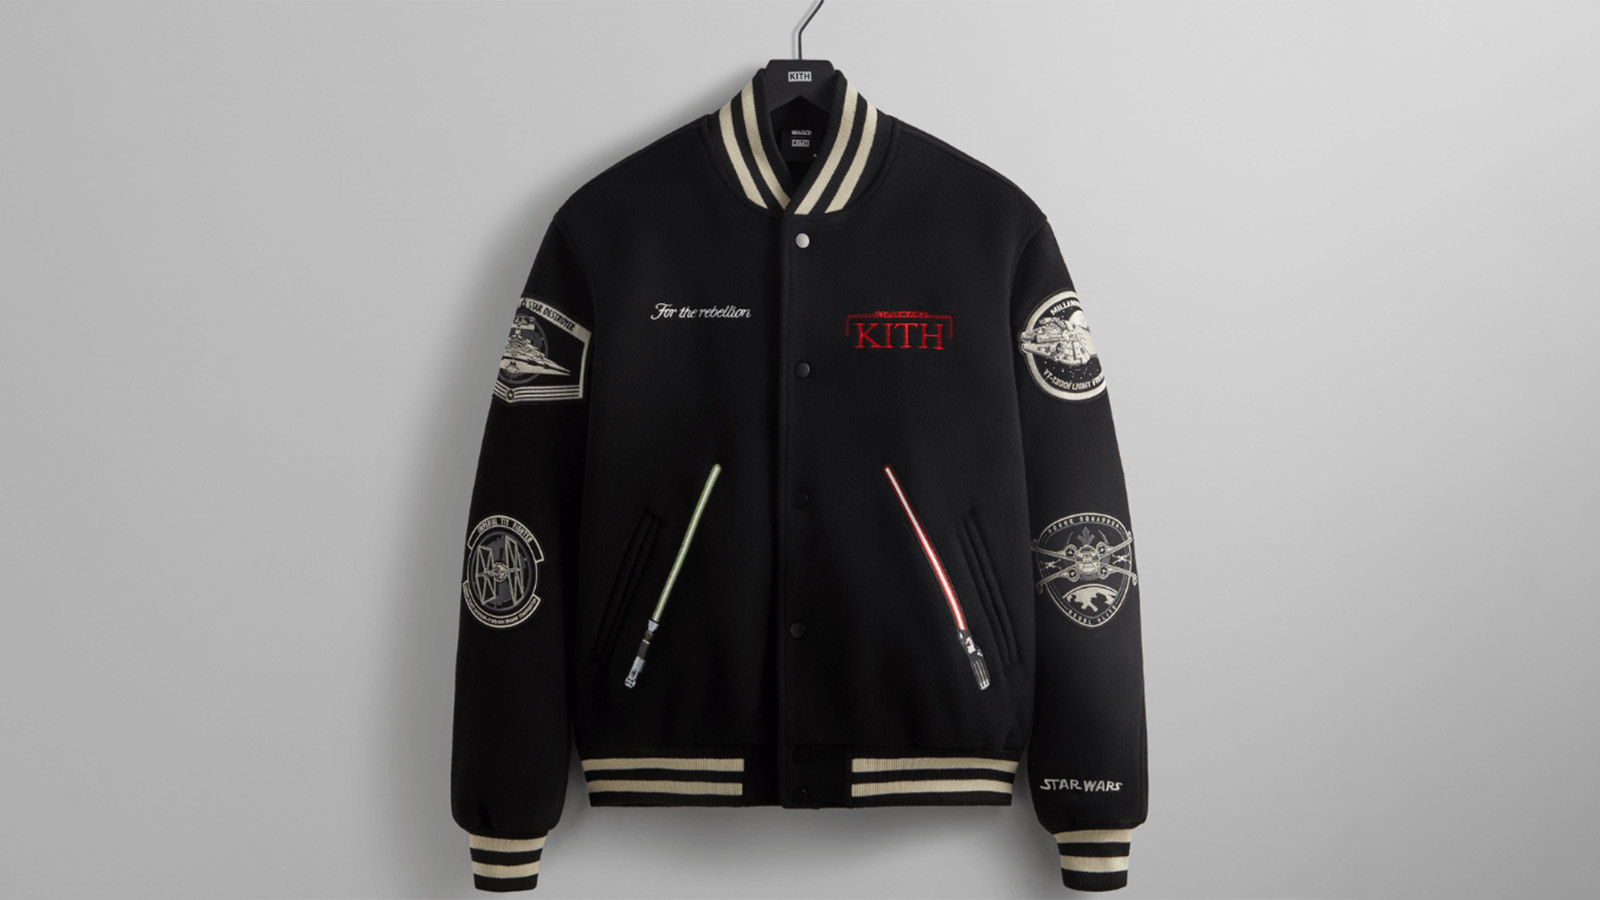 “Star Wars” x Kith “Return of the Jedi” collection